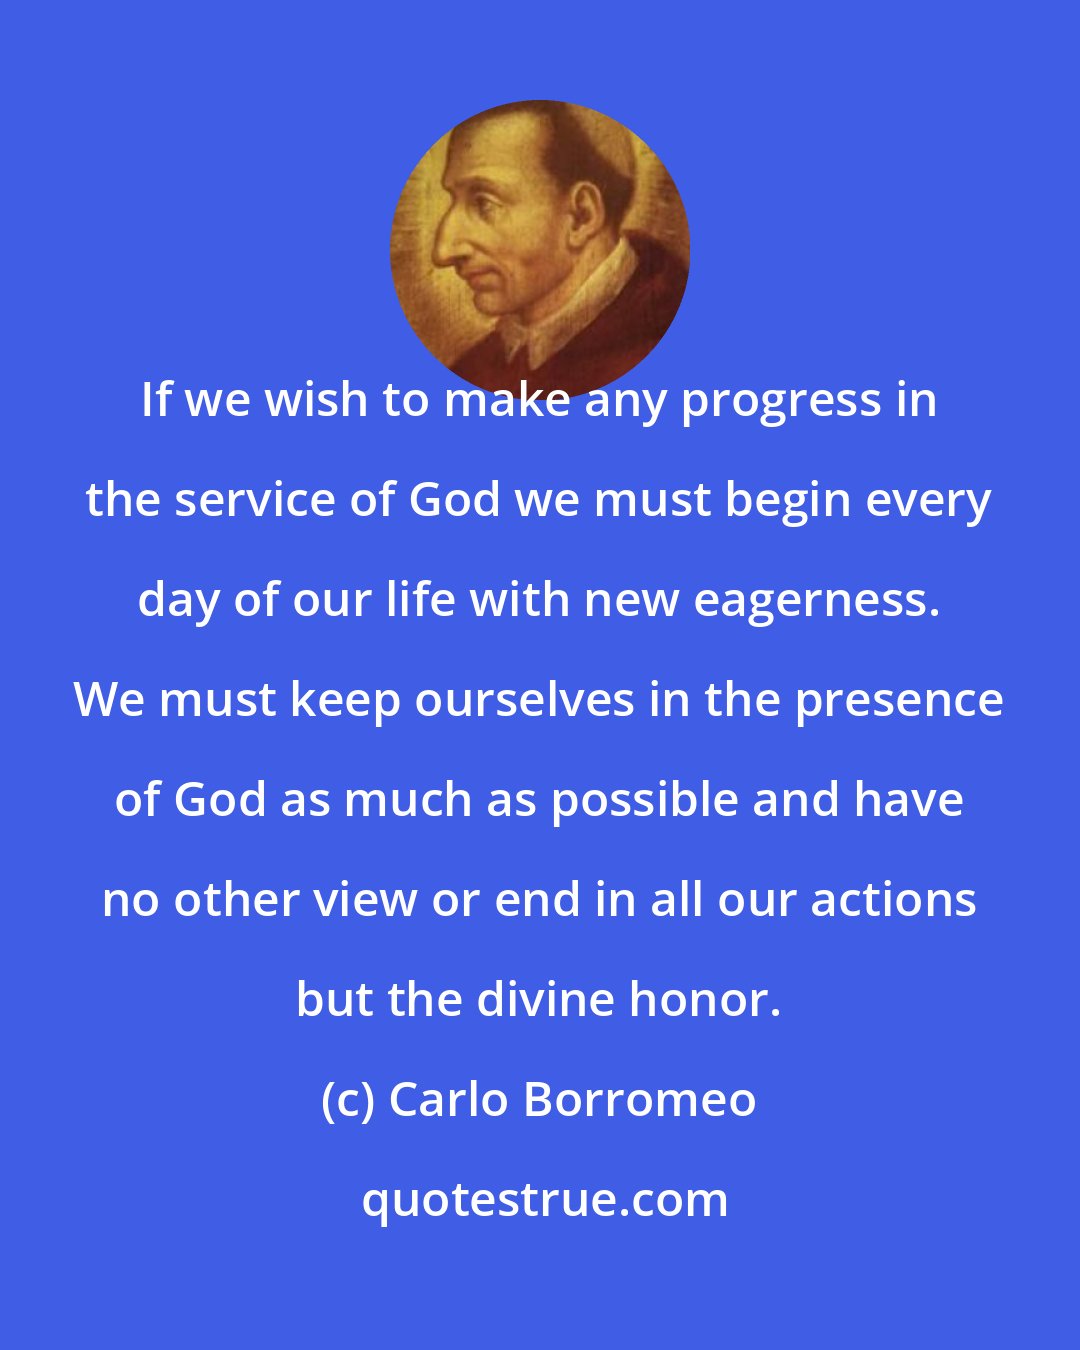 Carlo Borromeo: If we wish to make any progress in the service of God we must begin every day of our life with new eagerness. We must keep ourselves in the presence of God as much as possible and have no other view or end in all our actions but the divine honor.